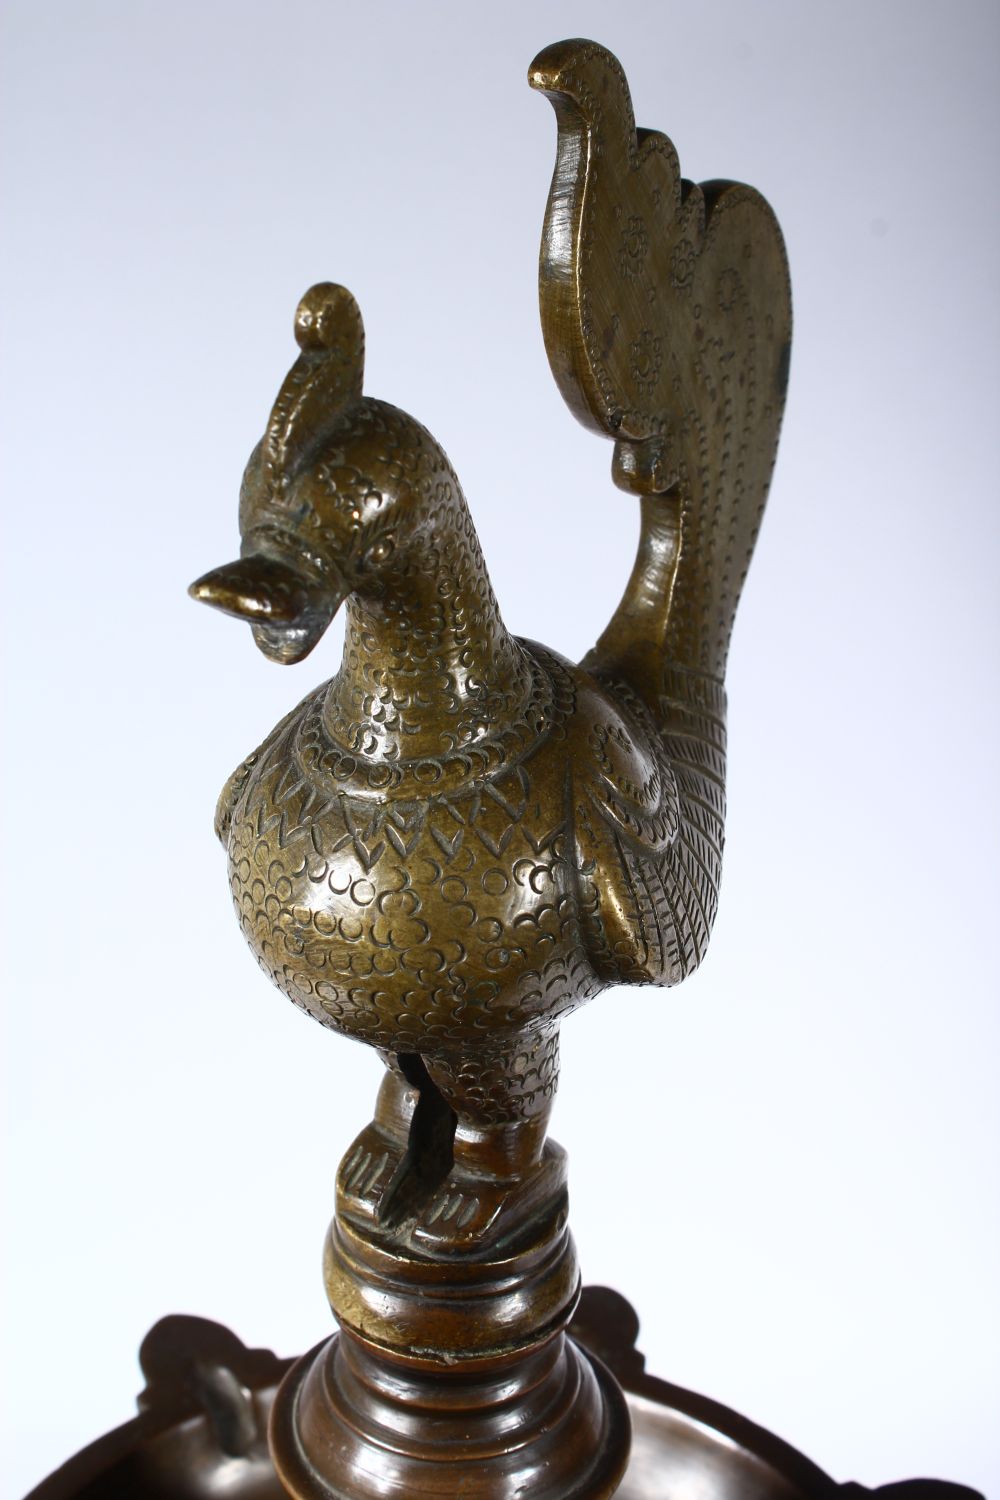 A GOOD 19TH CENTURY INDIAN BRONZE LAMP, with cockerel finial on a circular base, 60cm high. - Image 3 of 4